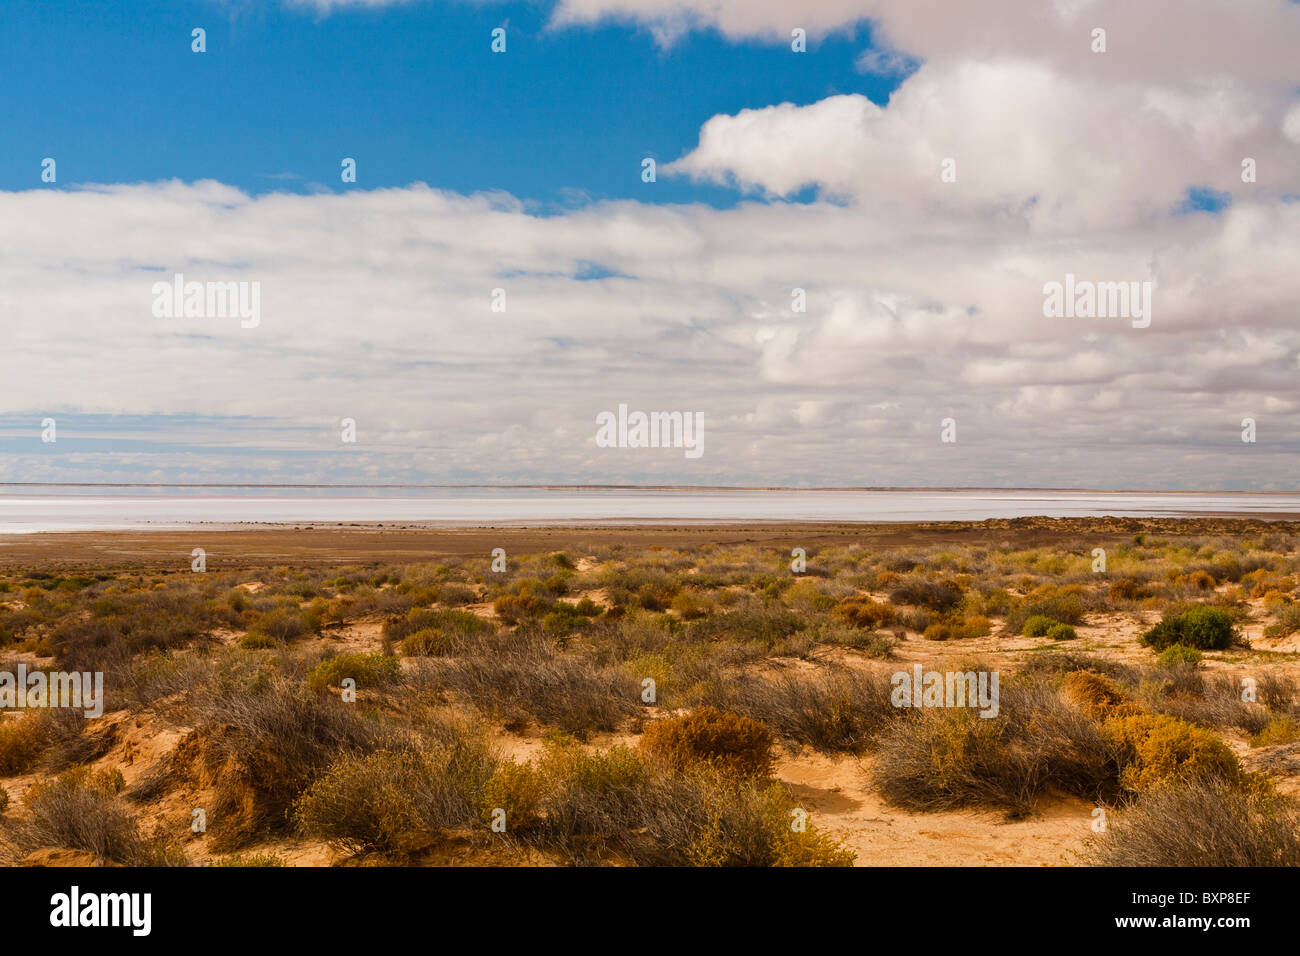 Looking over the saltflats to the water in Lake Eyre South in South Australia's Outback Stock Photo